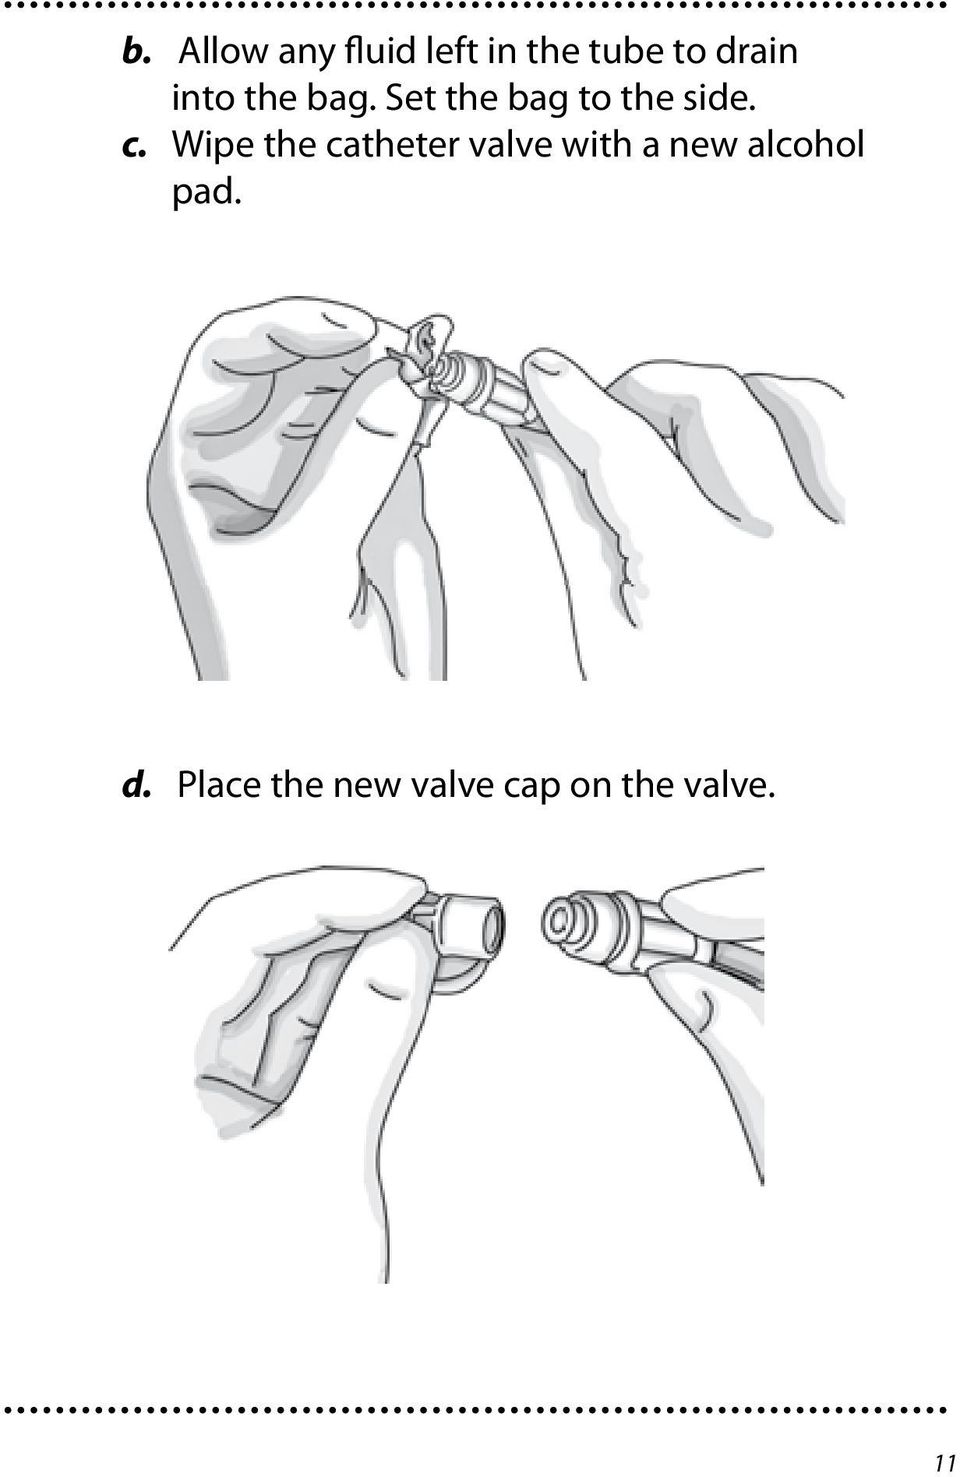 Wipe the catheter valve with a new alcohol